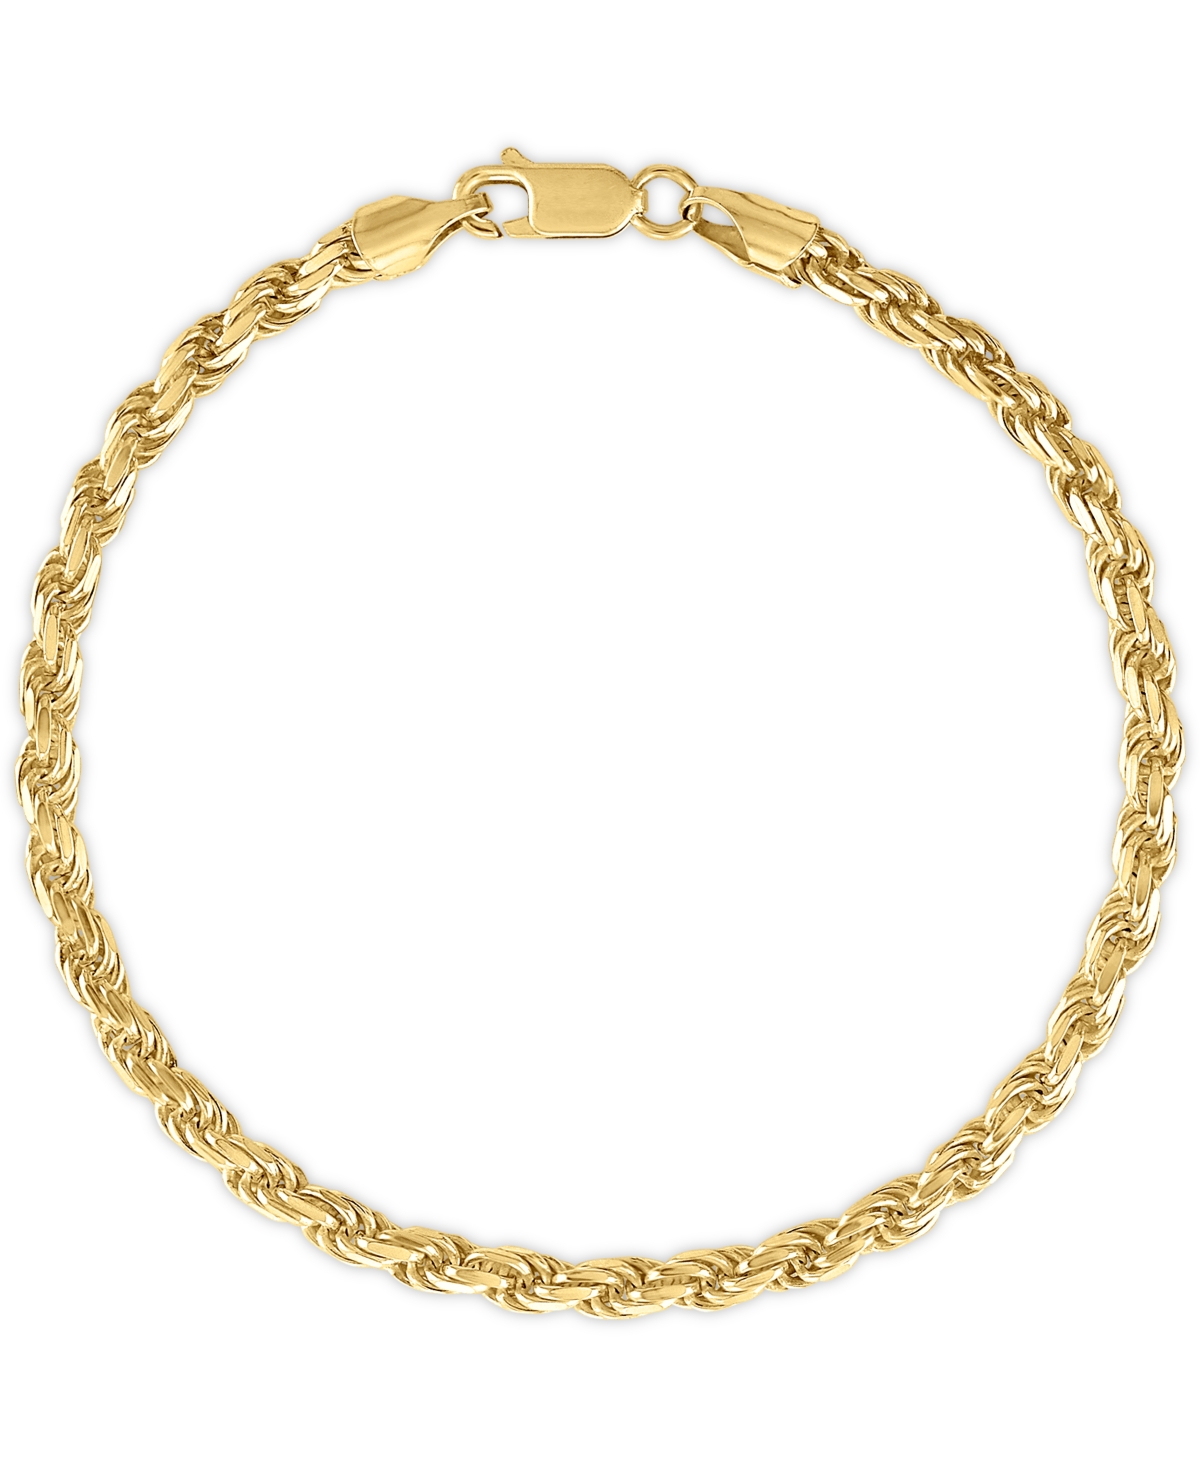 Rope Link Chain Bracelet (4mm), Created for Macy's - Gold Over Silver